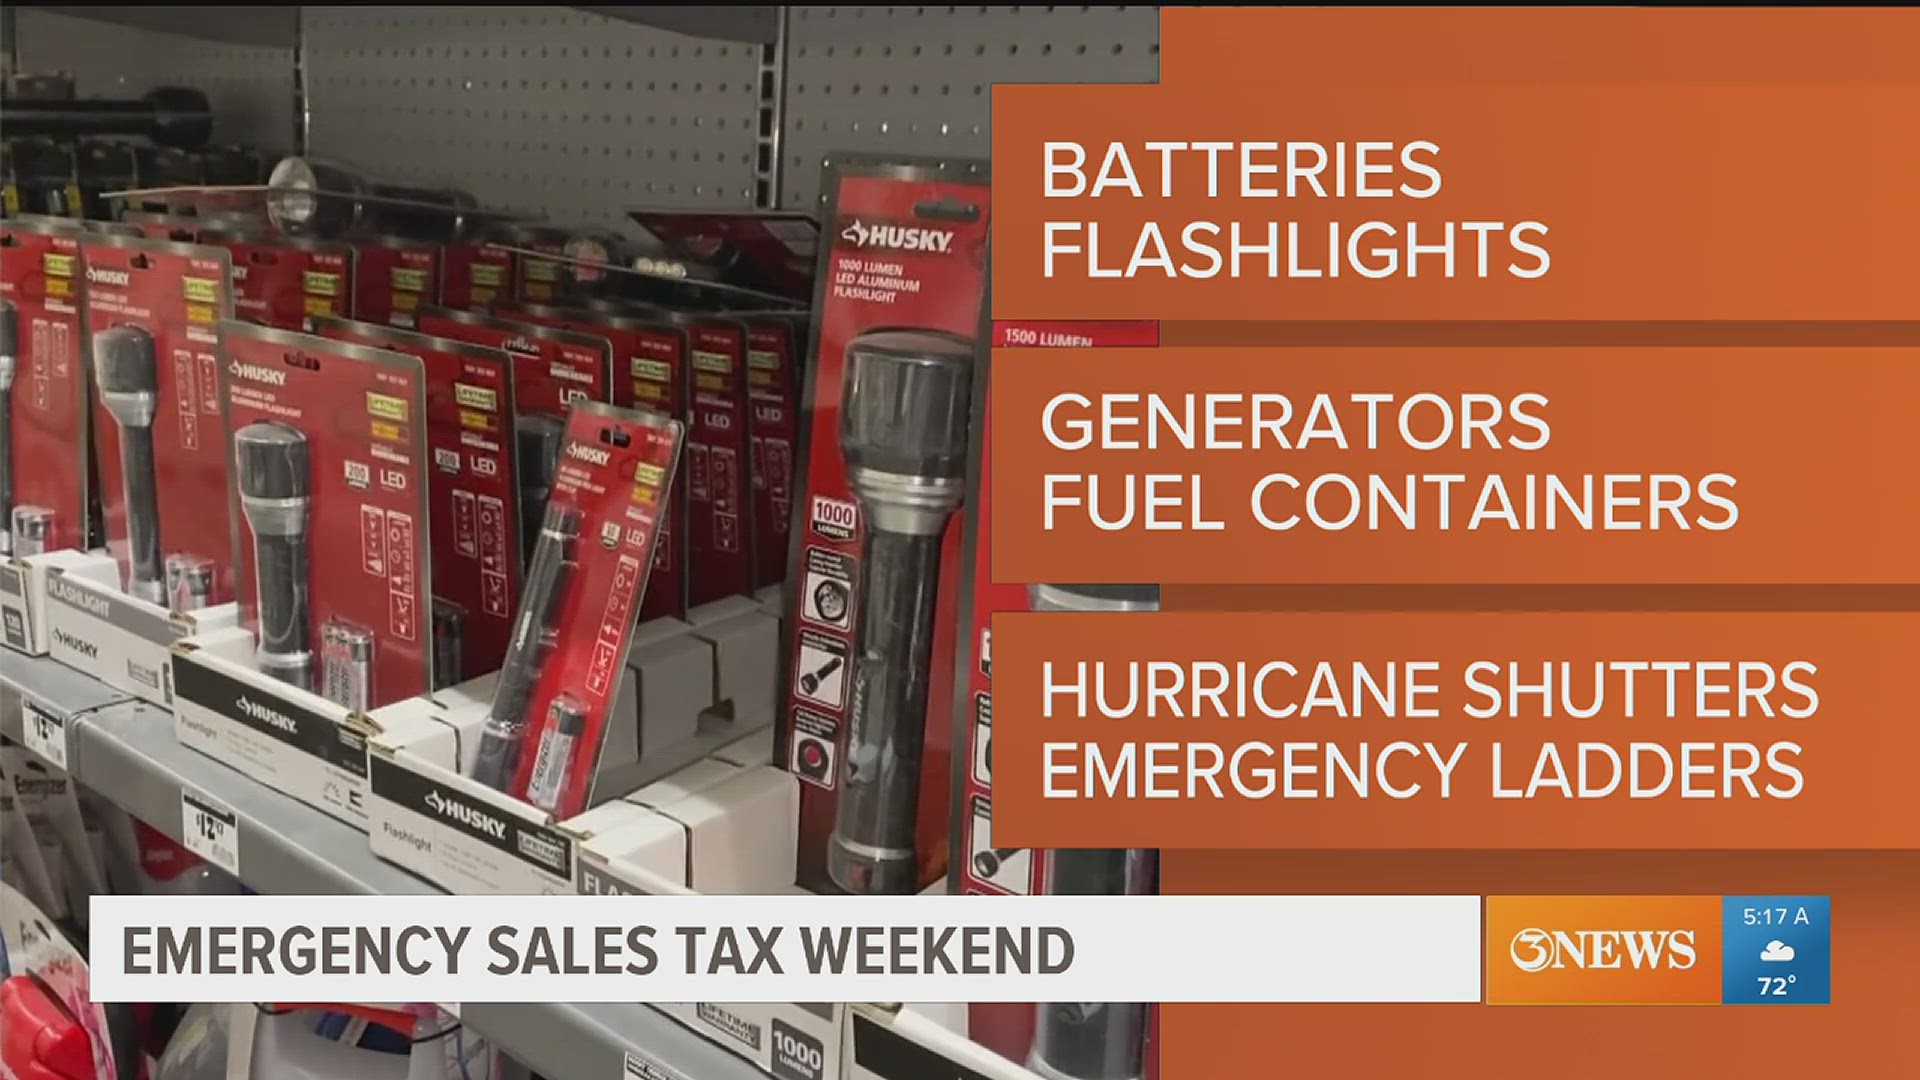 Qualifying items include batteries, fuel containers, flashlights, hurricane shutters and generators.